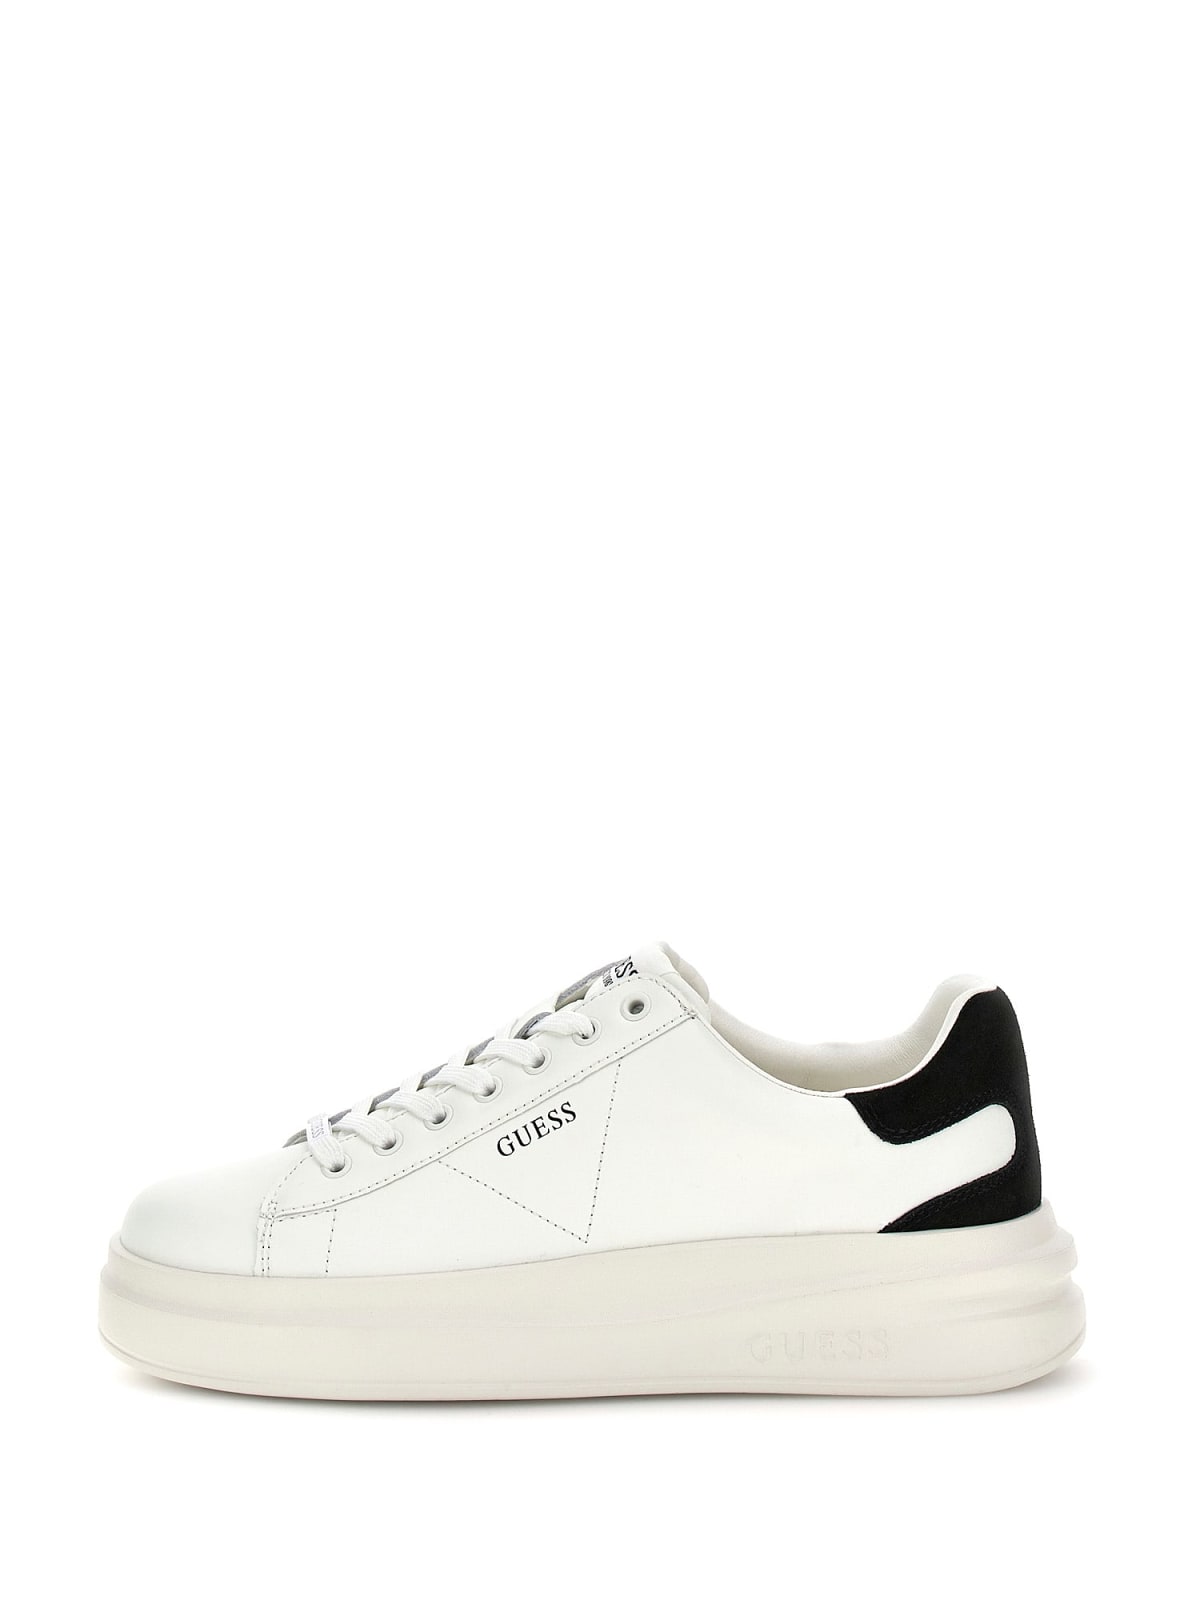 Sneakers Guess Donna Elbina Bianco/nero